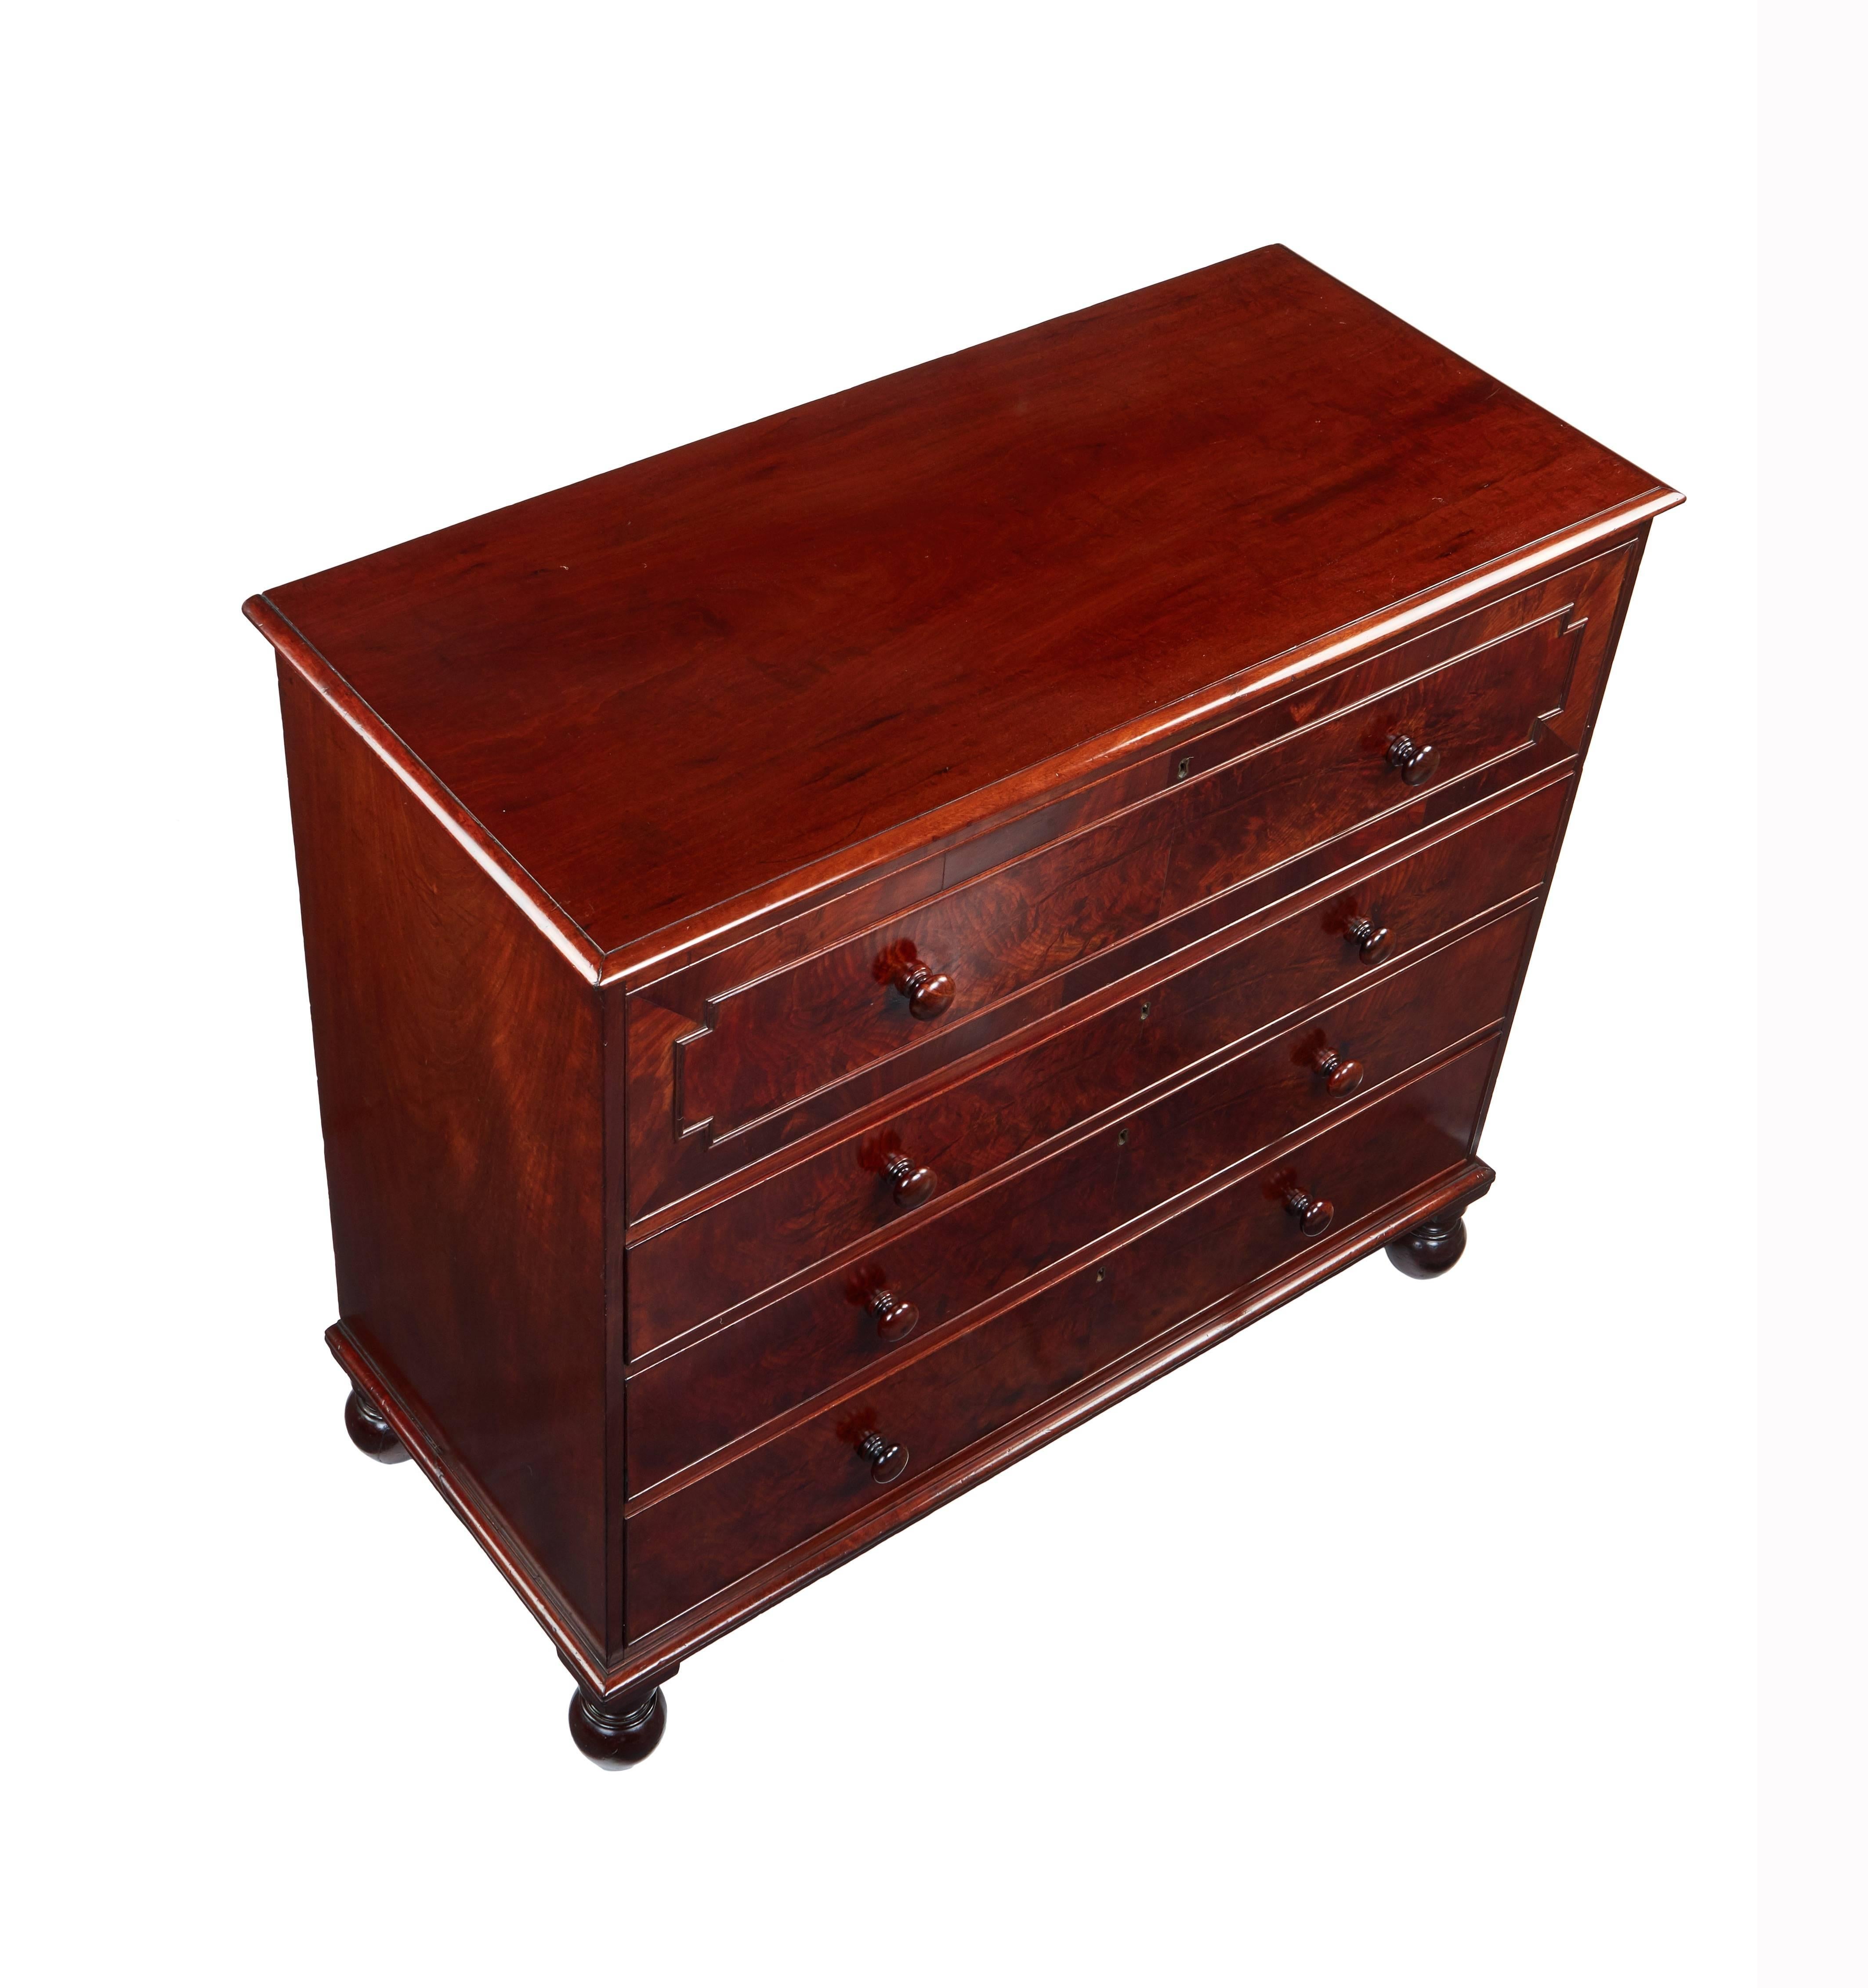 A George IV mahogany and crossbanded chest attributed to Gillows
The rectangular moulded top above a panelled deep drawer and three long graduated drawers, on turned bun feet, with rosewood turned handles, 120cm wide, 55cm deep, 109cm high.

This